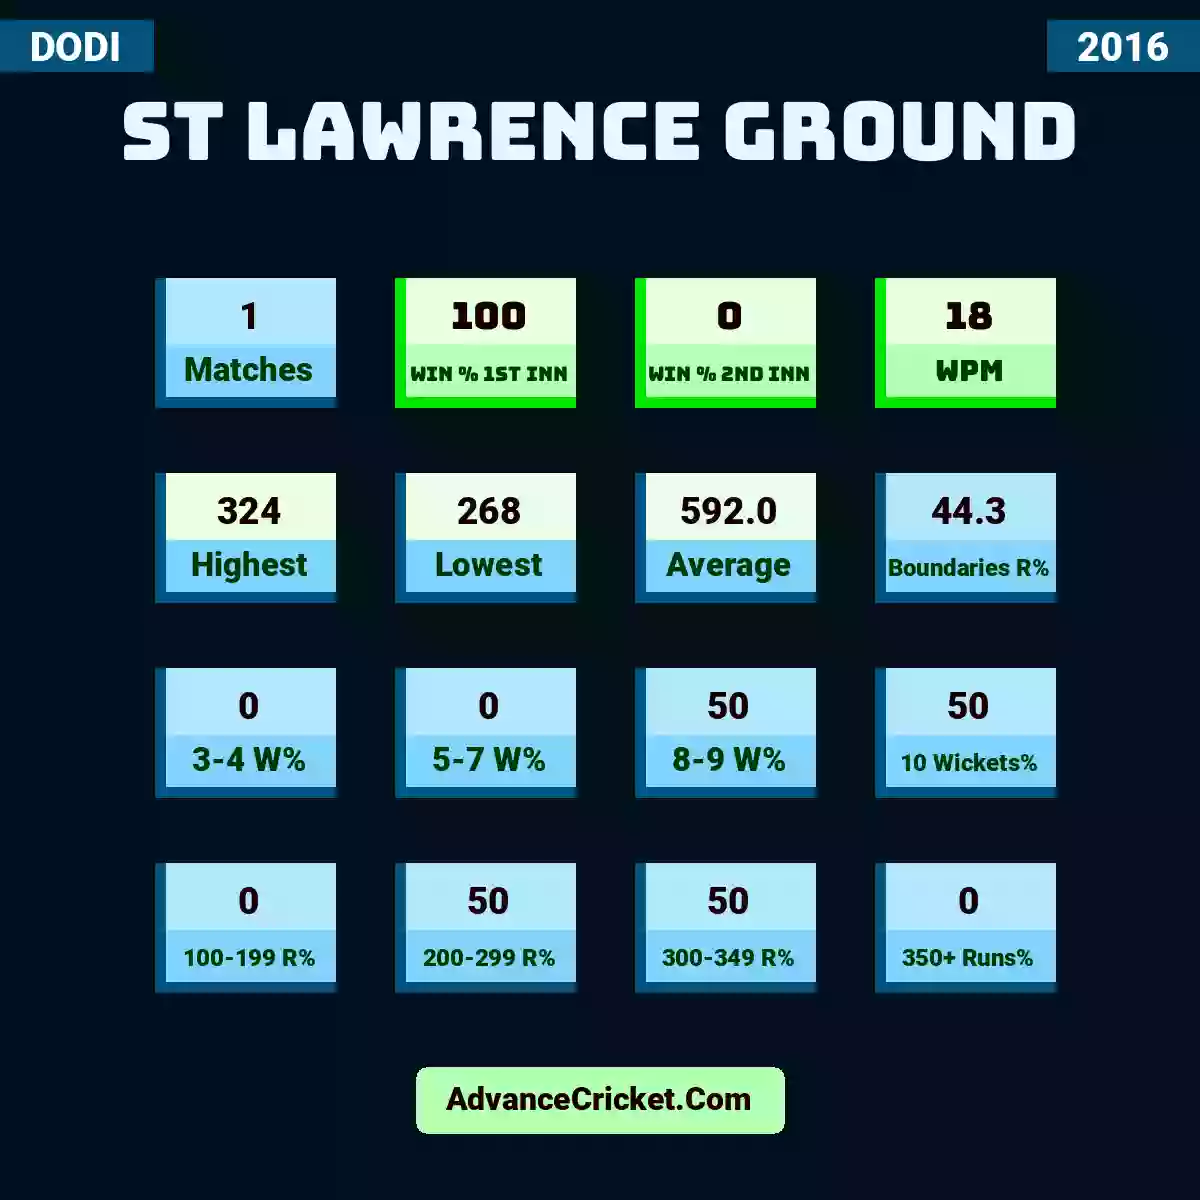 Image showing St Lawrence Ground with Matches: 1, Win % 1st Inn: 100, Win % 2nd Inn: 0, WPM: 18, Highest: 324, Lowest: 268, Average: 592.0, Boundaries R%: 44.3, 3-4 W%: 0, 5-7 W%: 0, 8-9 W%: 50, 10 Wickets%: 50, 100-199 R%: 0, 200-299 R%: 50, 300-349 R%: 50, 350+ Runs%: 0.